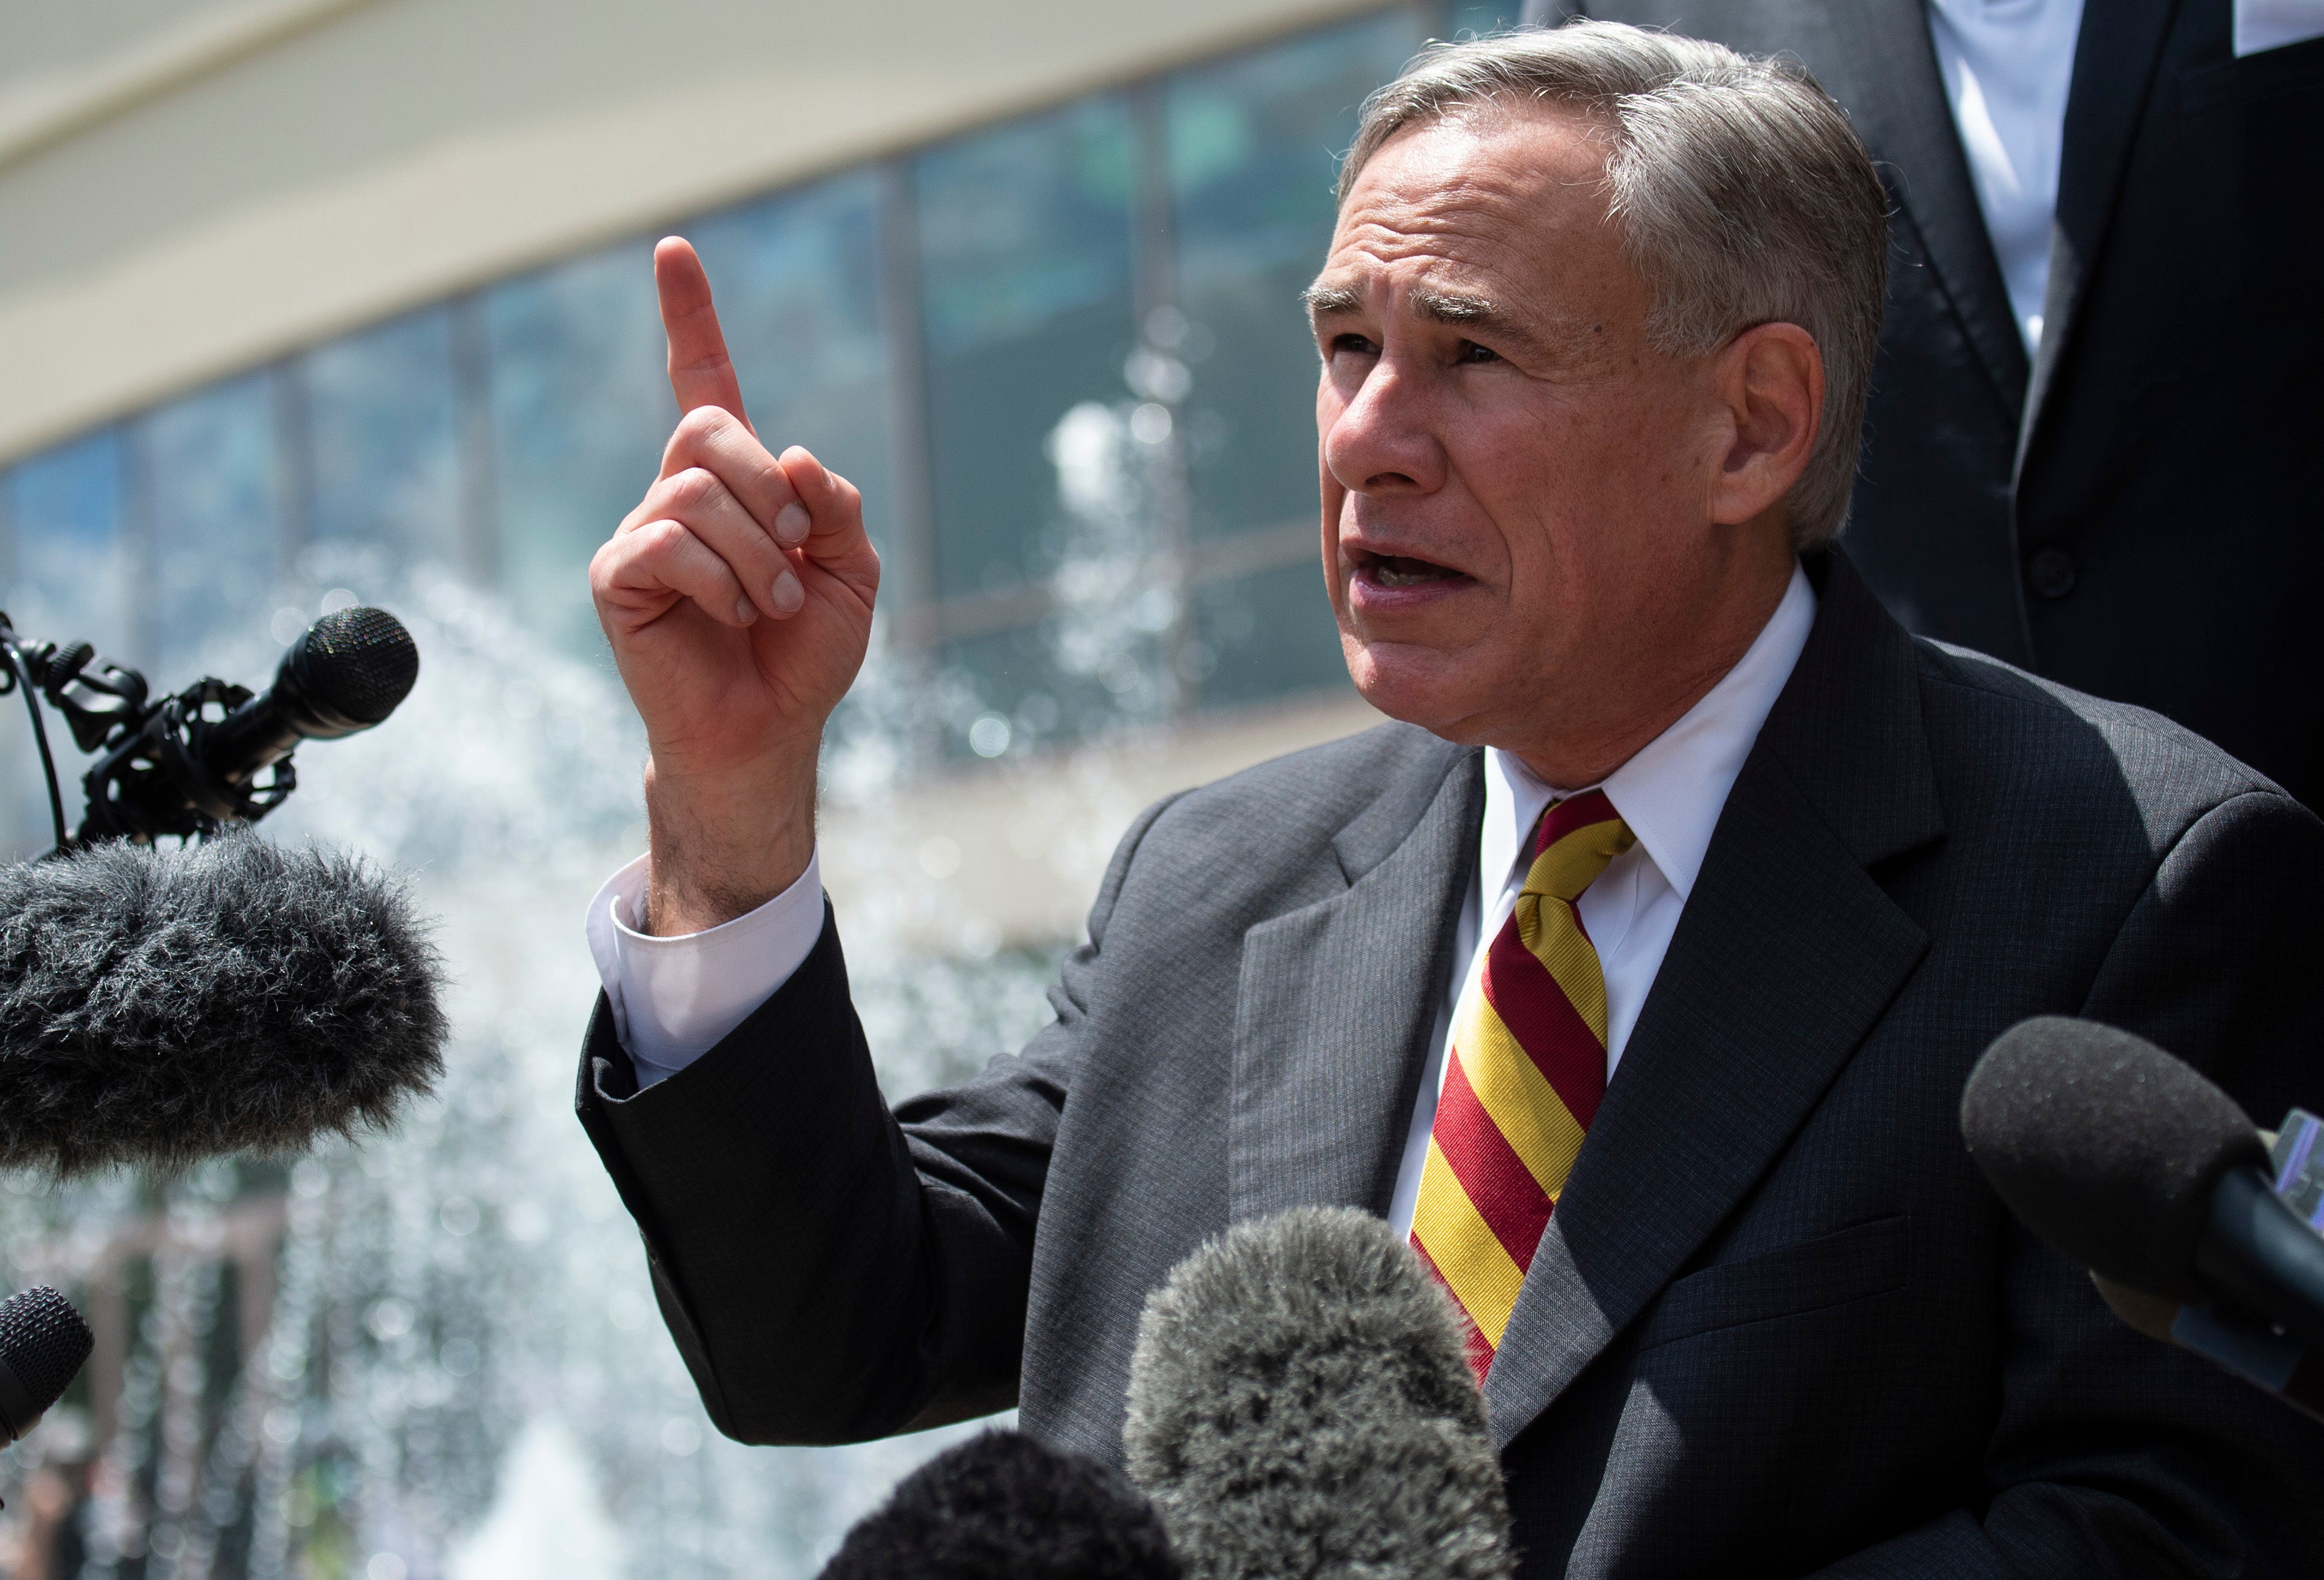 Governor Gregg Abbot signed a near total abortion ban into Texas law in 2021